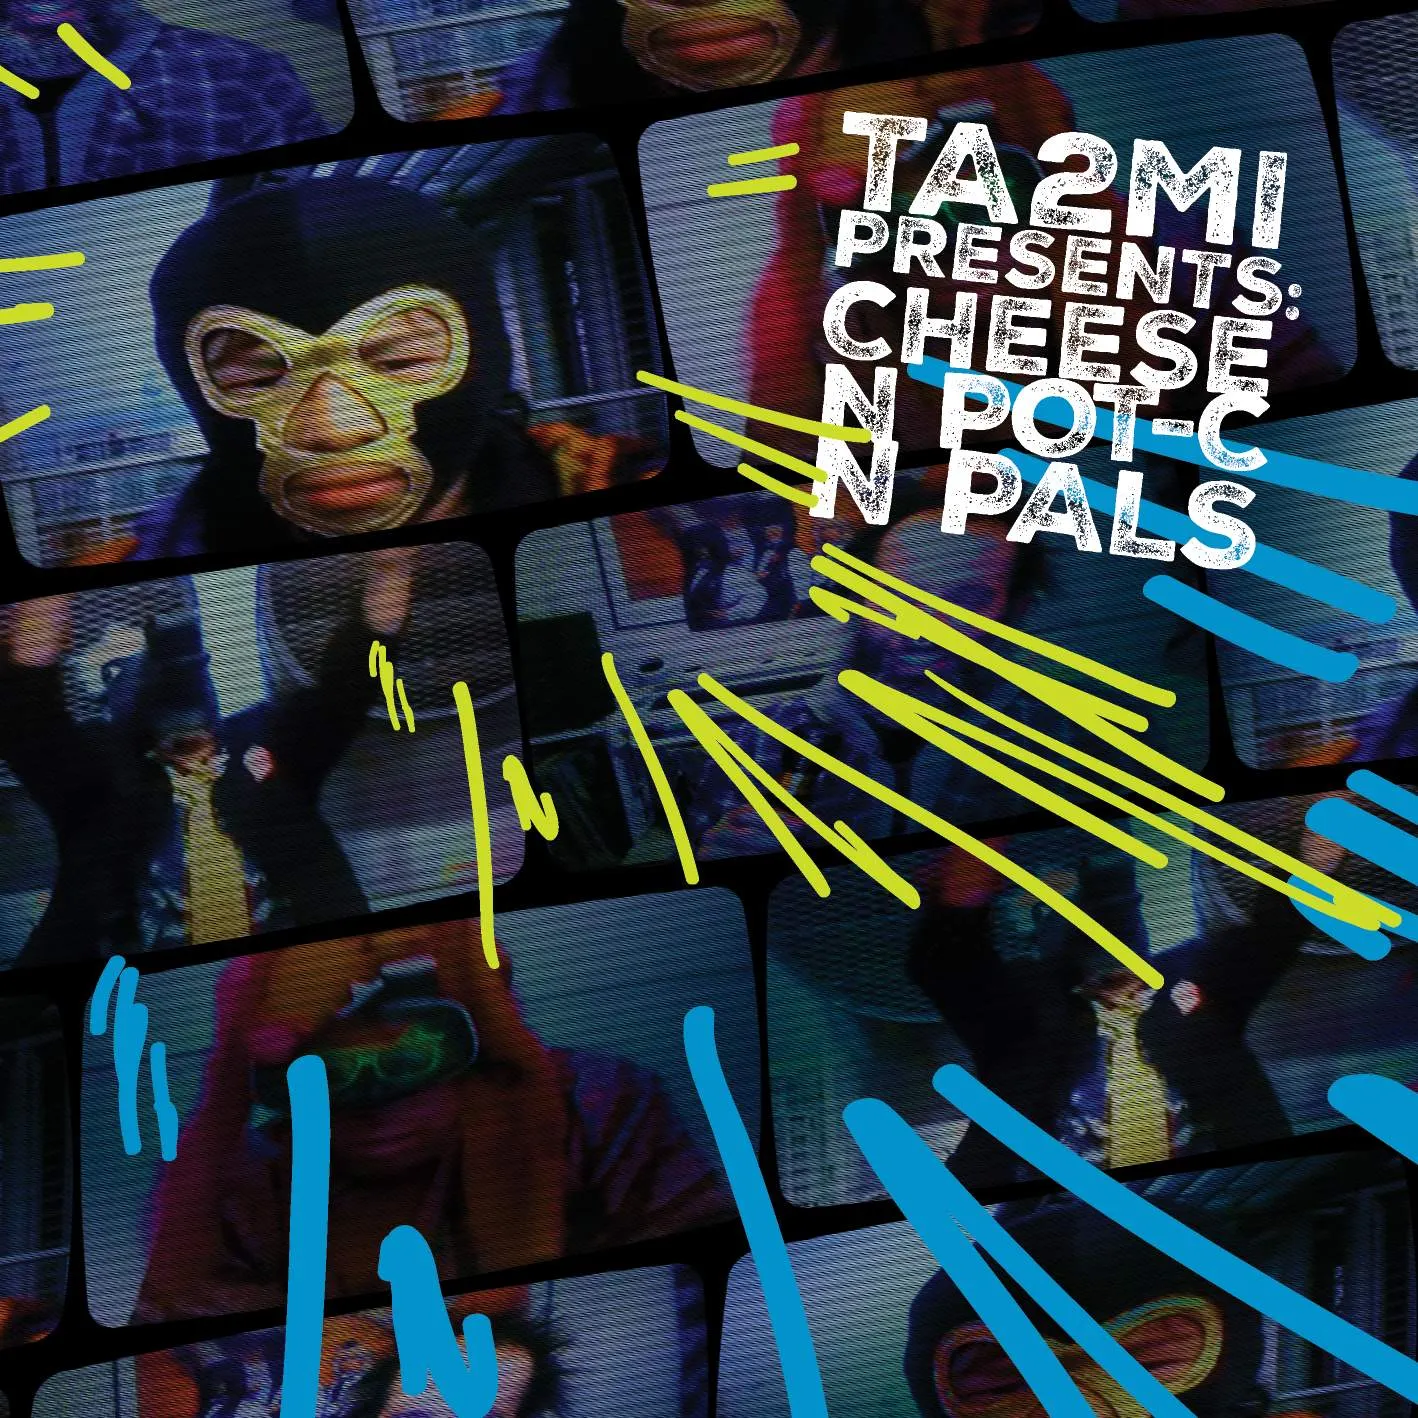 Album cover for “TA2MI Presents: Cheese N Pot-C N Pals” by Cheese N Pot-C